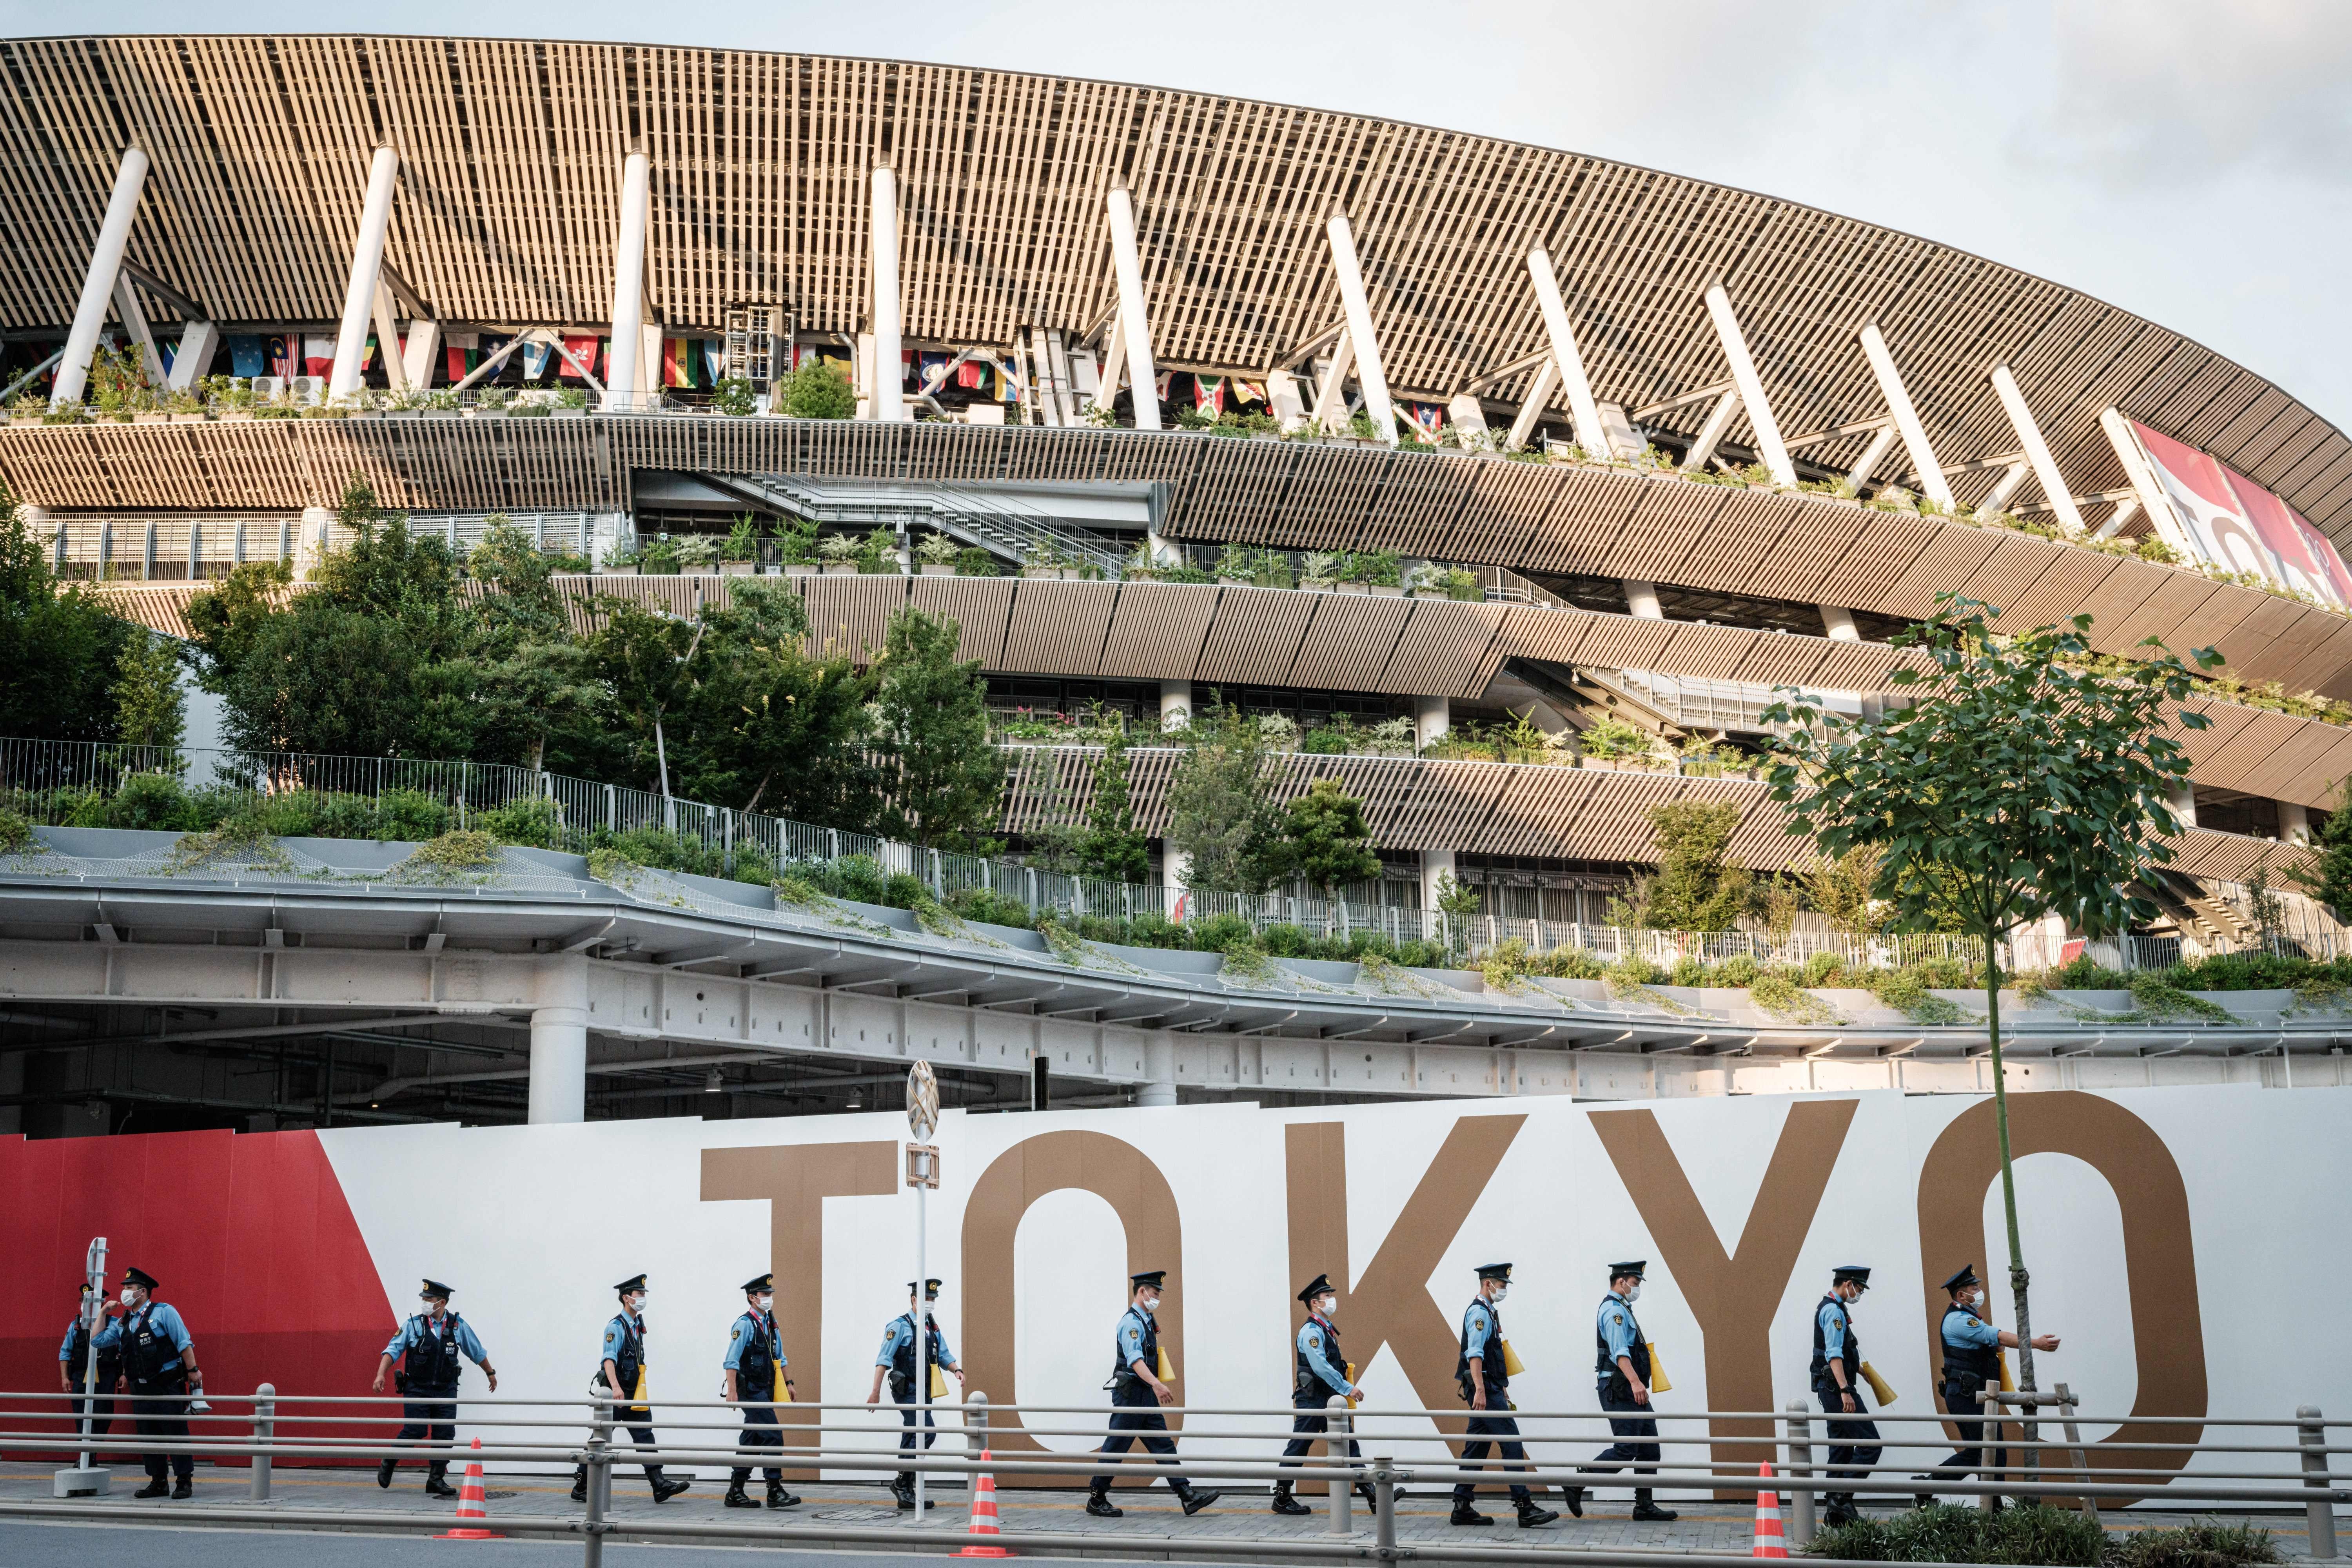 Police officers move towards their position ahead of the opening ceremony of the Tokyo 2020 Olympic Games near the Olympic Stadium in Tokyo on July 23, 2021. (Photo by Yasuyoshi CHIBA / AFP) (Photo by YASUYOSHI CHIBA/AFP via Getty Images)